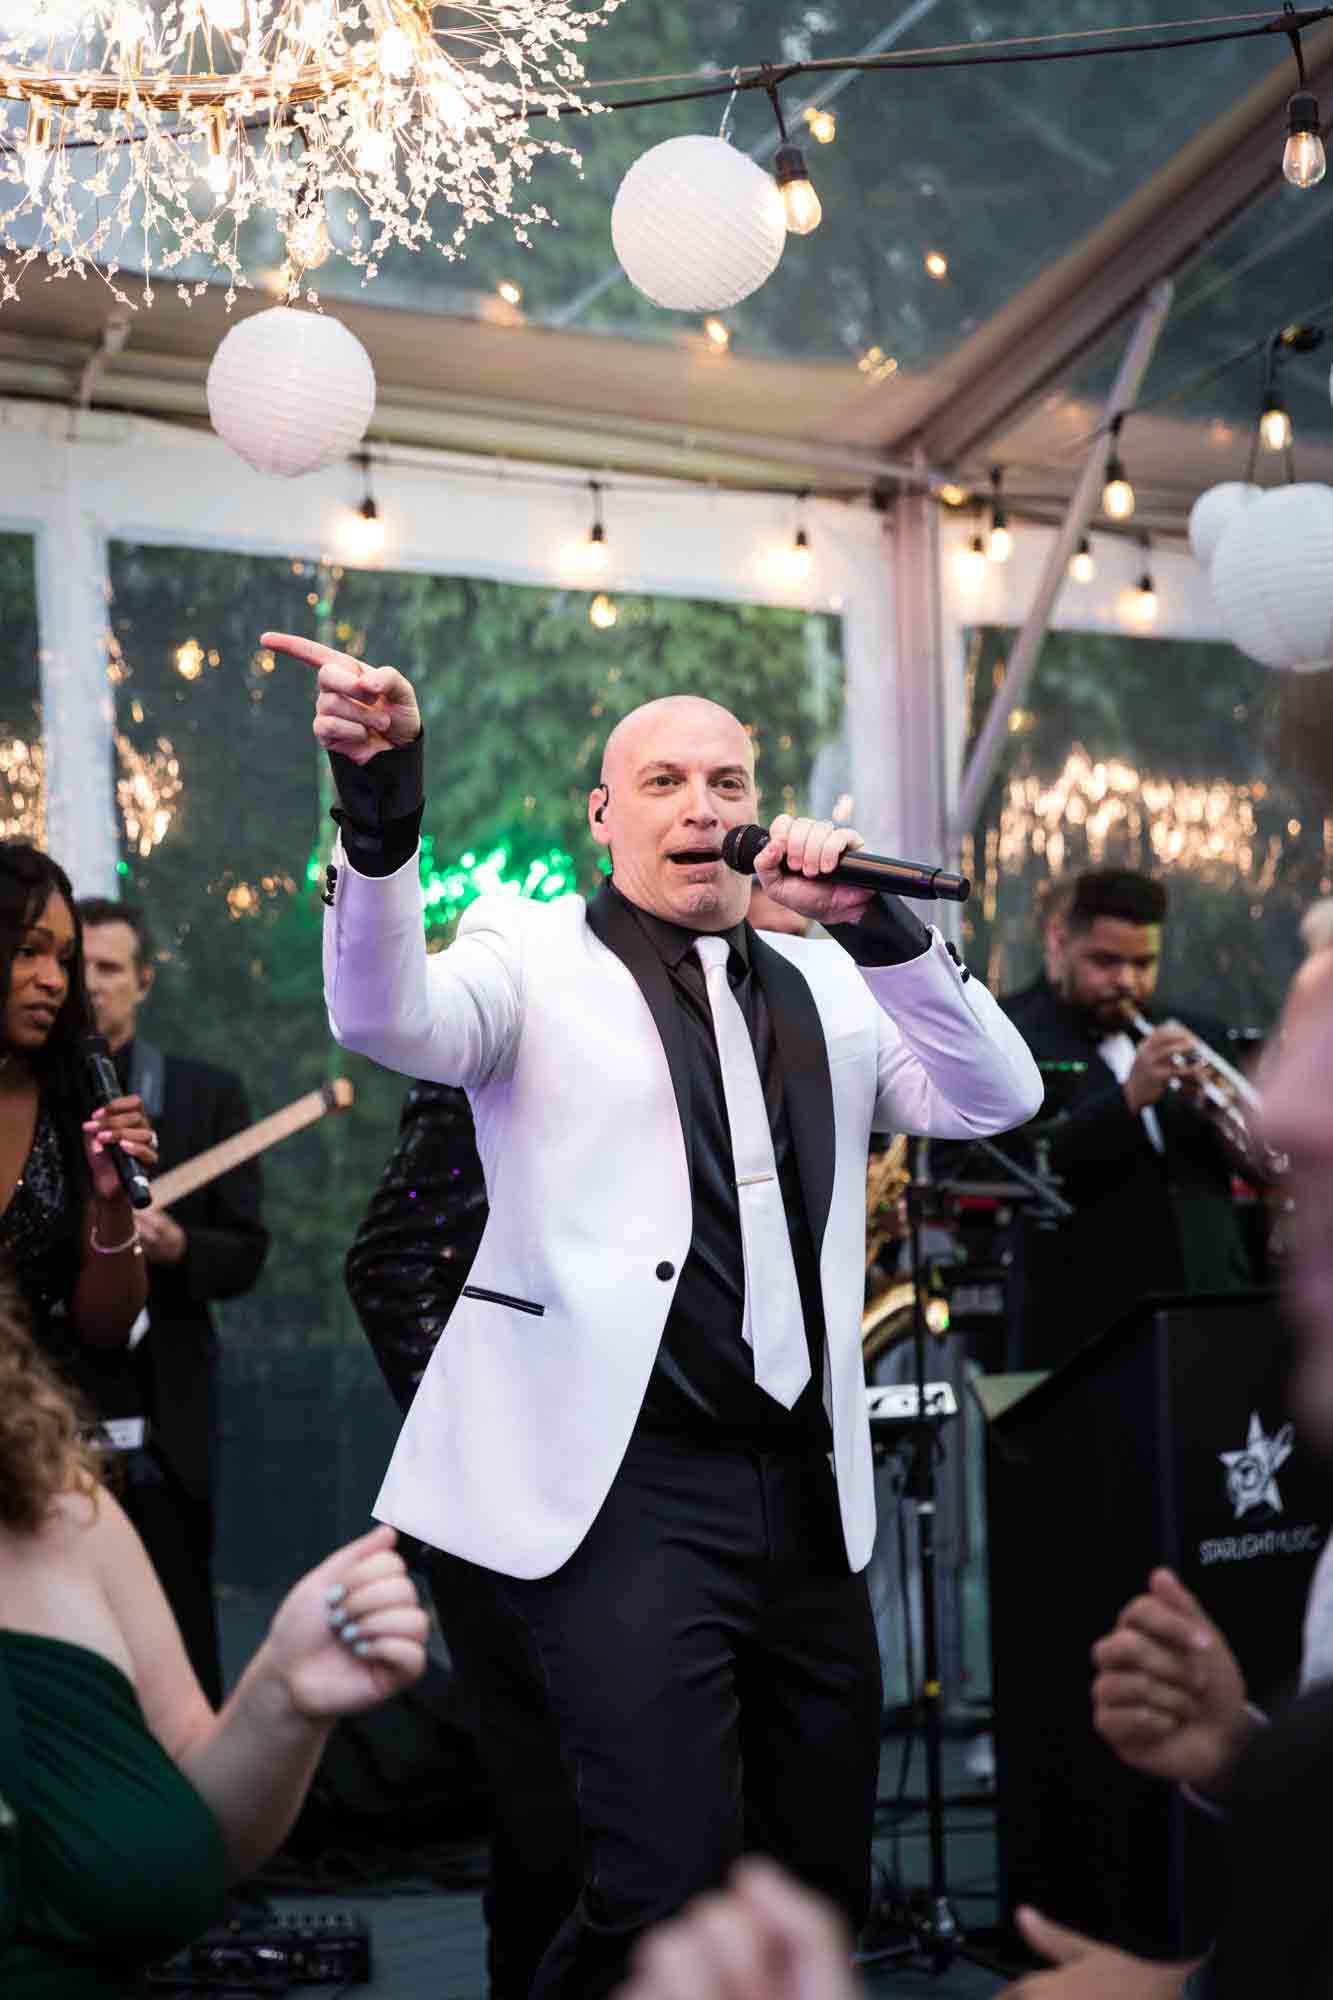 Man in white tuxedo singing into microphone at a Sanctuary Roosevelt Island wedding